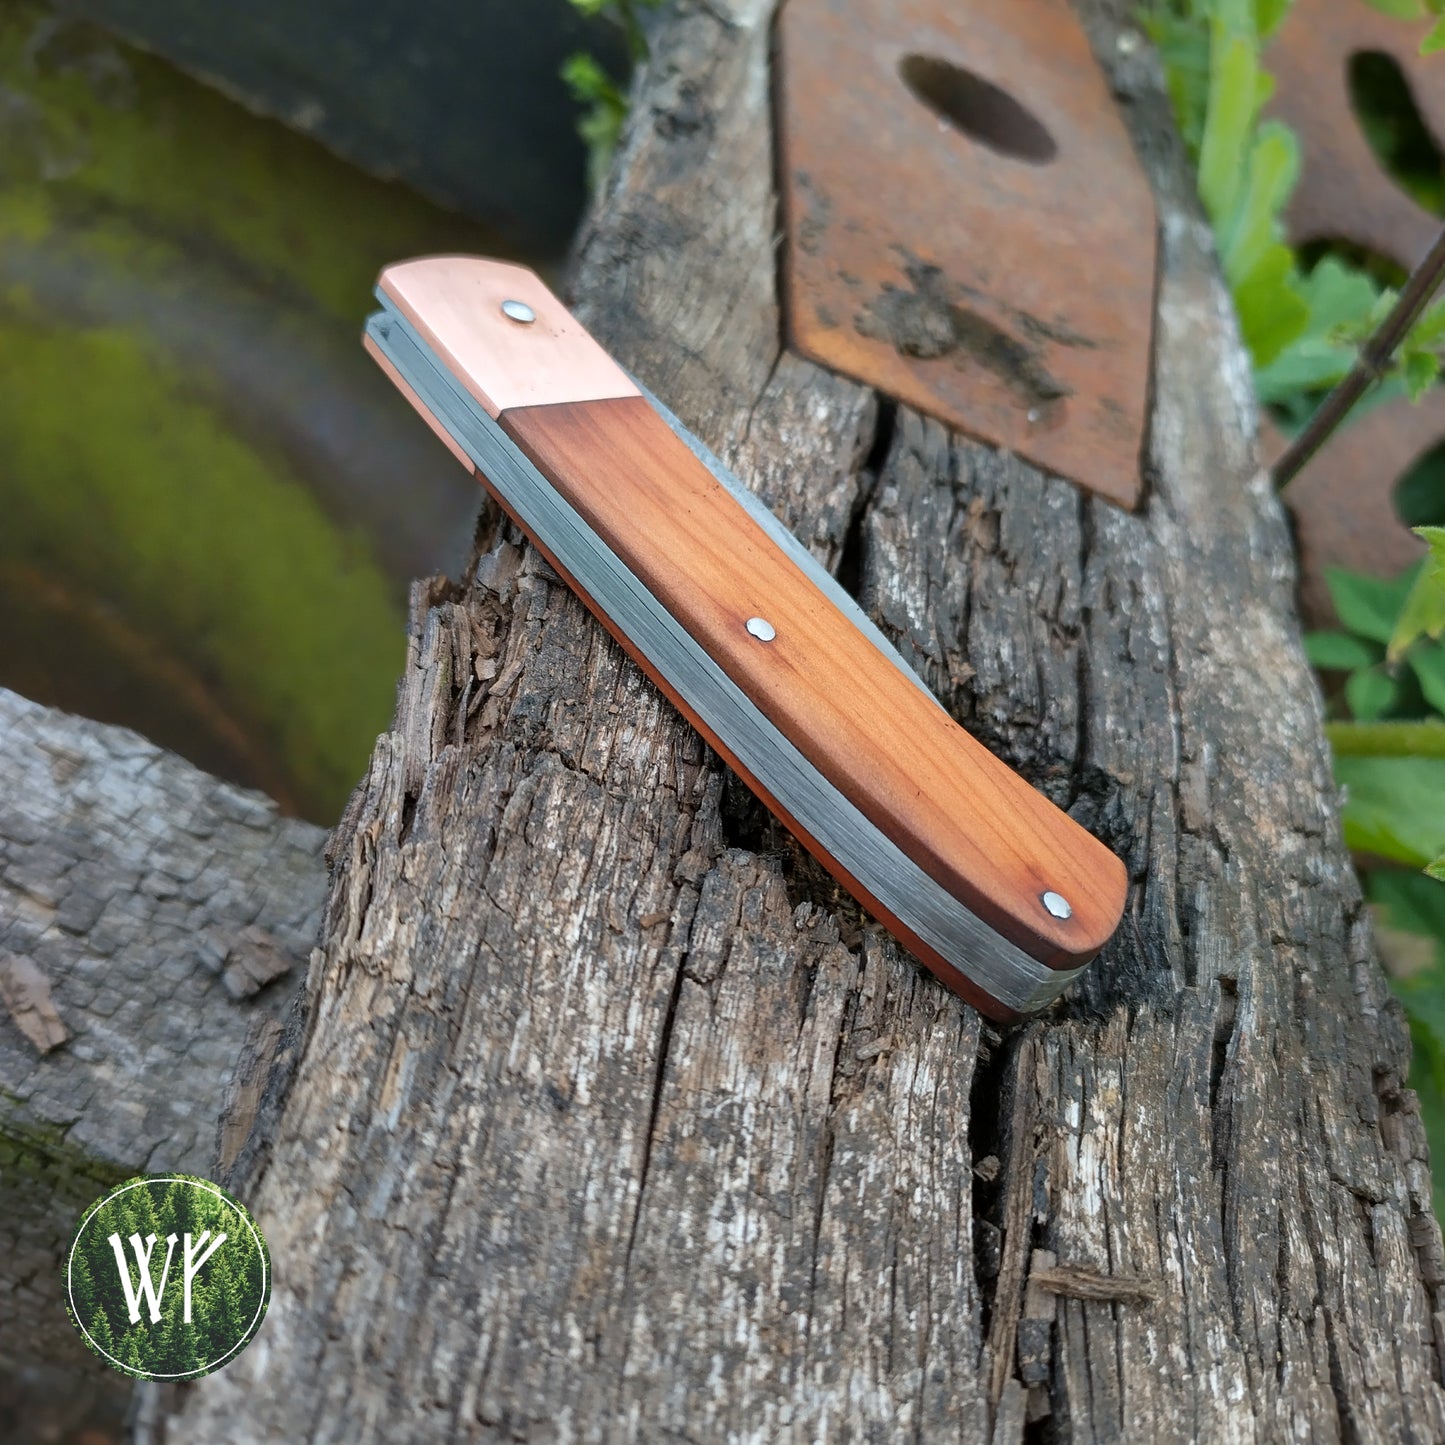 RESERVED FOR LUCKY Hand-forged Slipjoint / UK Legal Folding Knife / 26c3 Blade with Copper & YewHandle